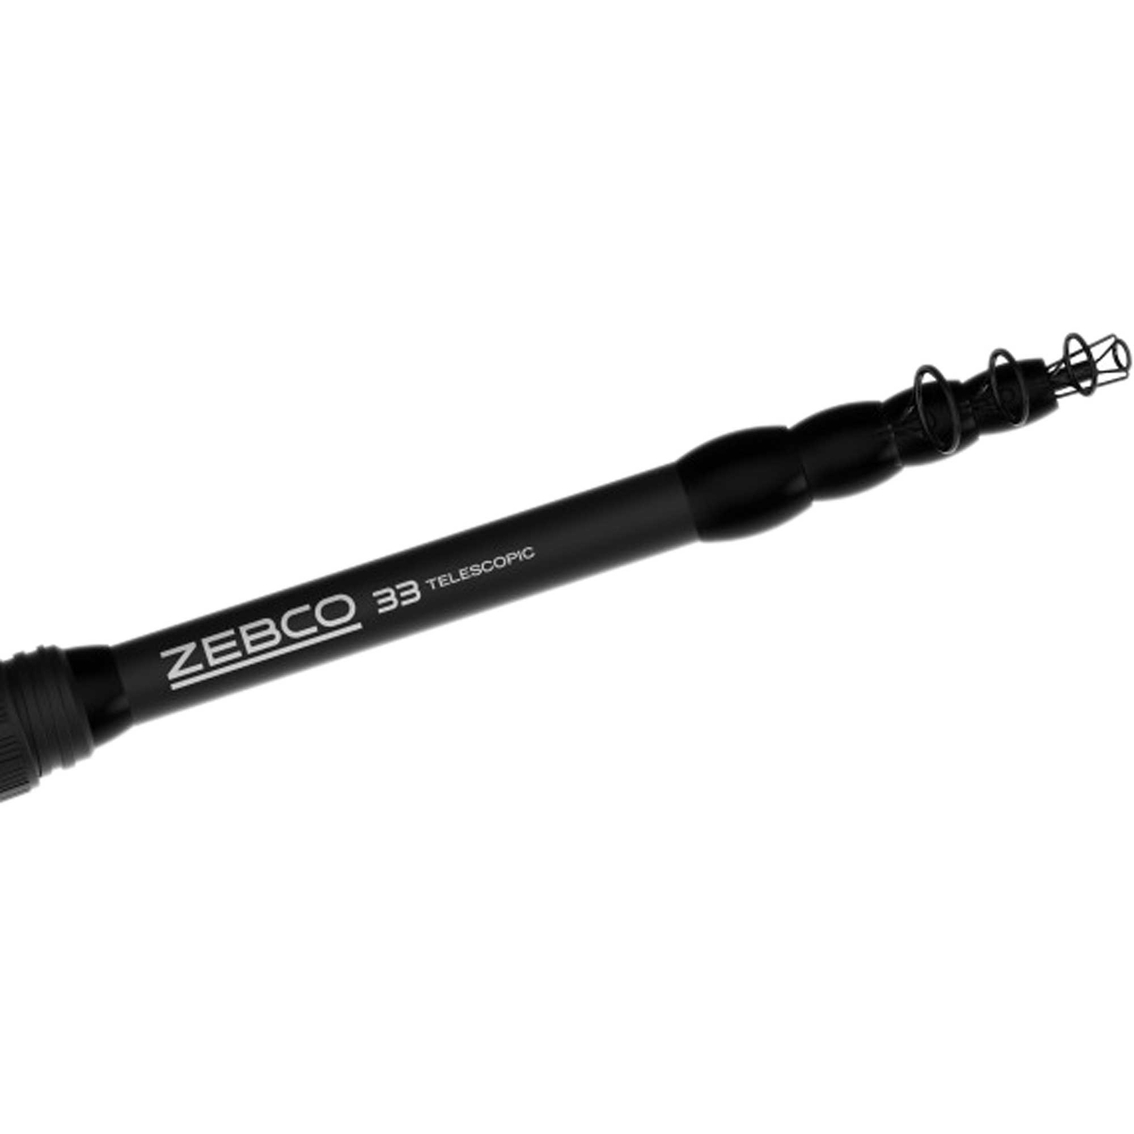 Zebco Telecast Fishing Rod And Reel